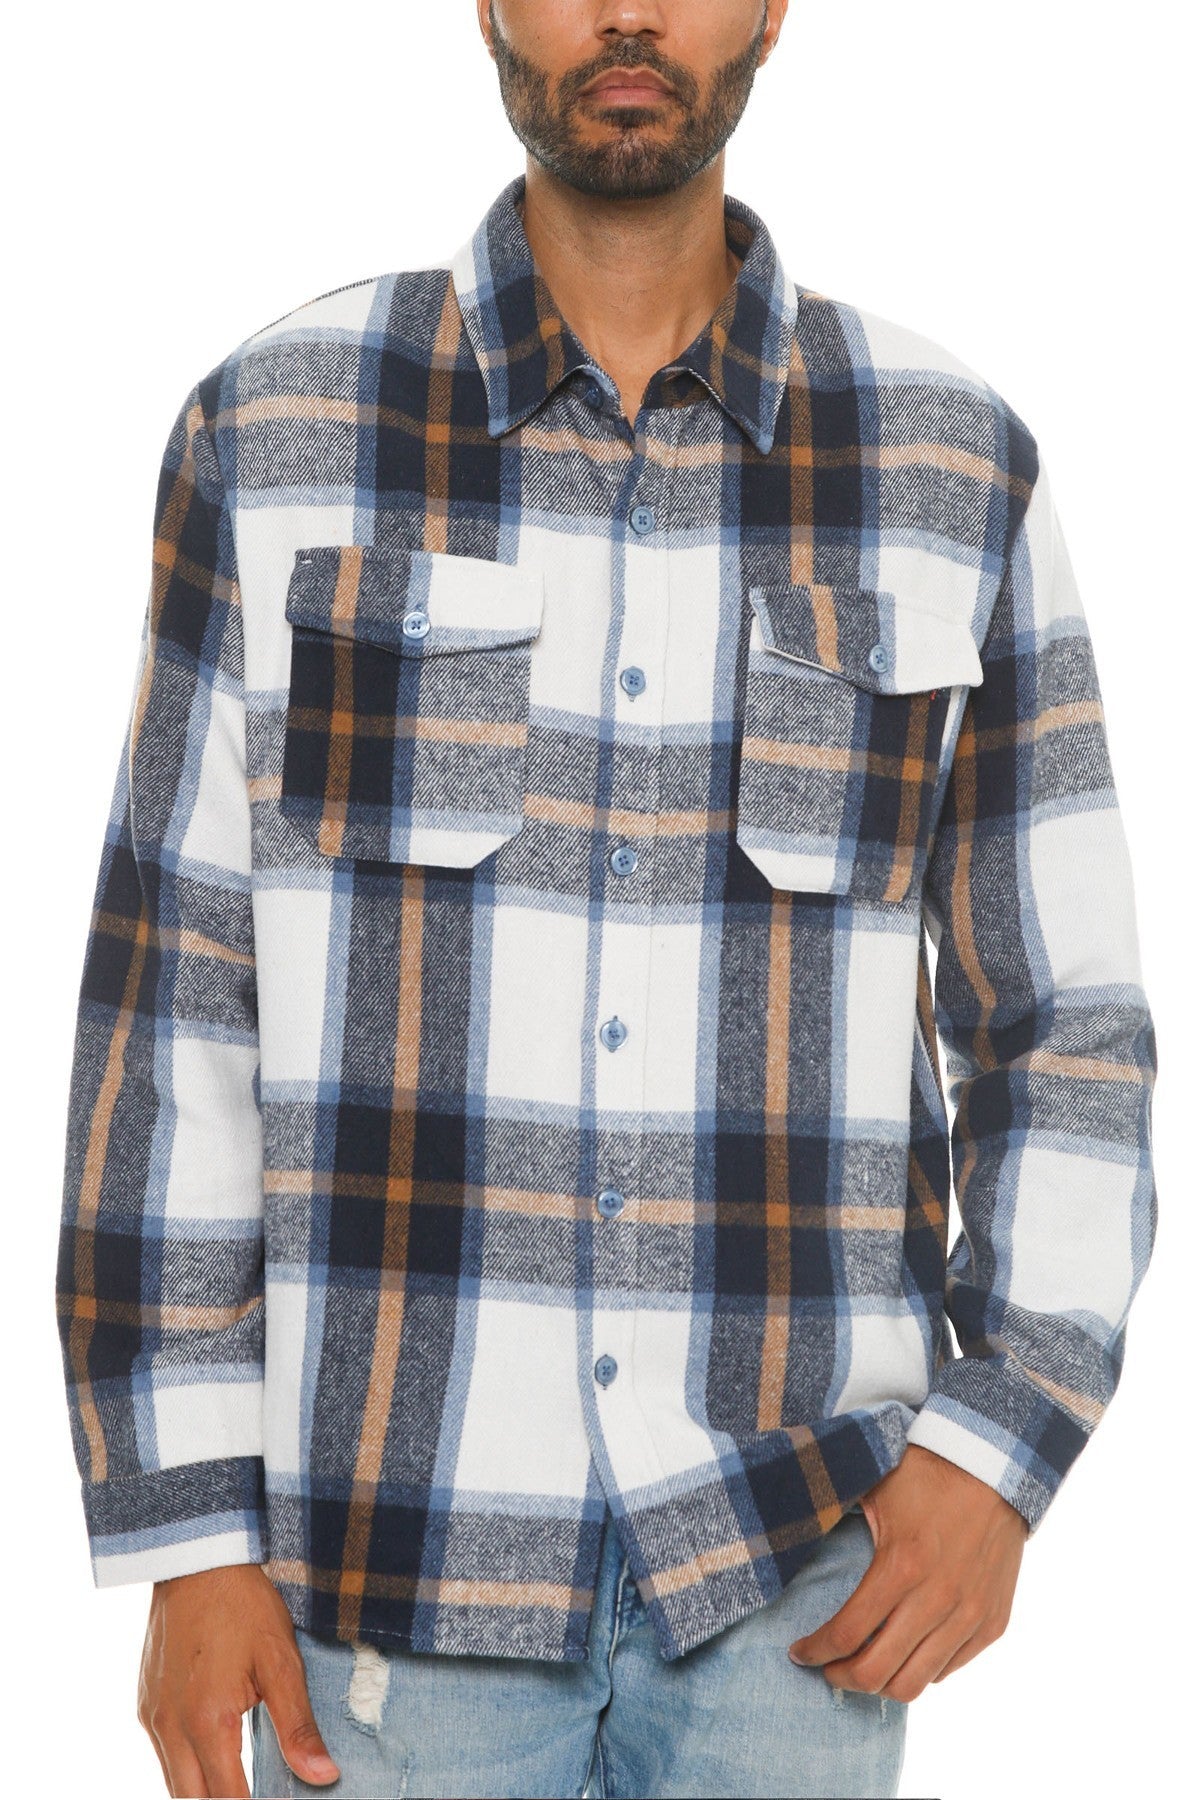 Blue/Gold Men's Checkered Soft Flannel Shacket - 8 colors - men's button-up shirt at TFC&H Co.